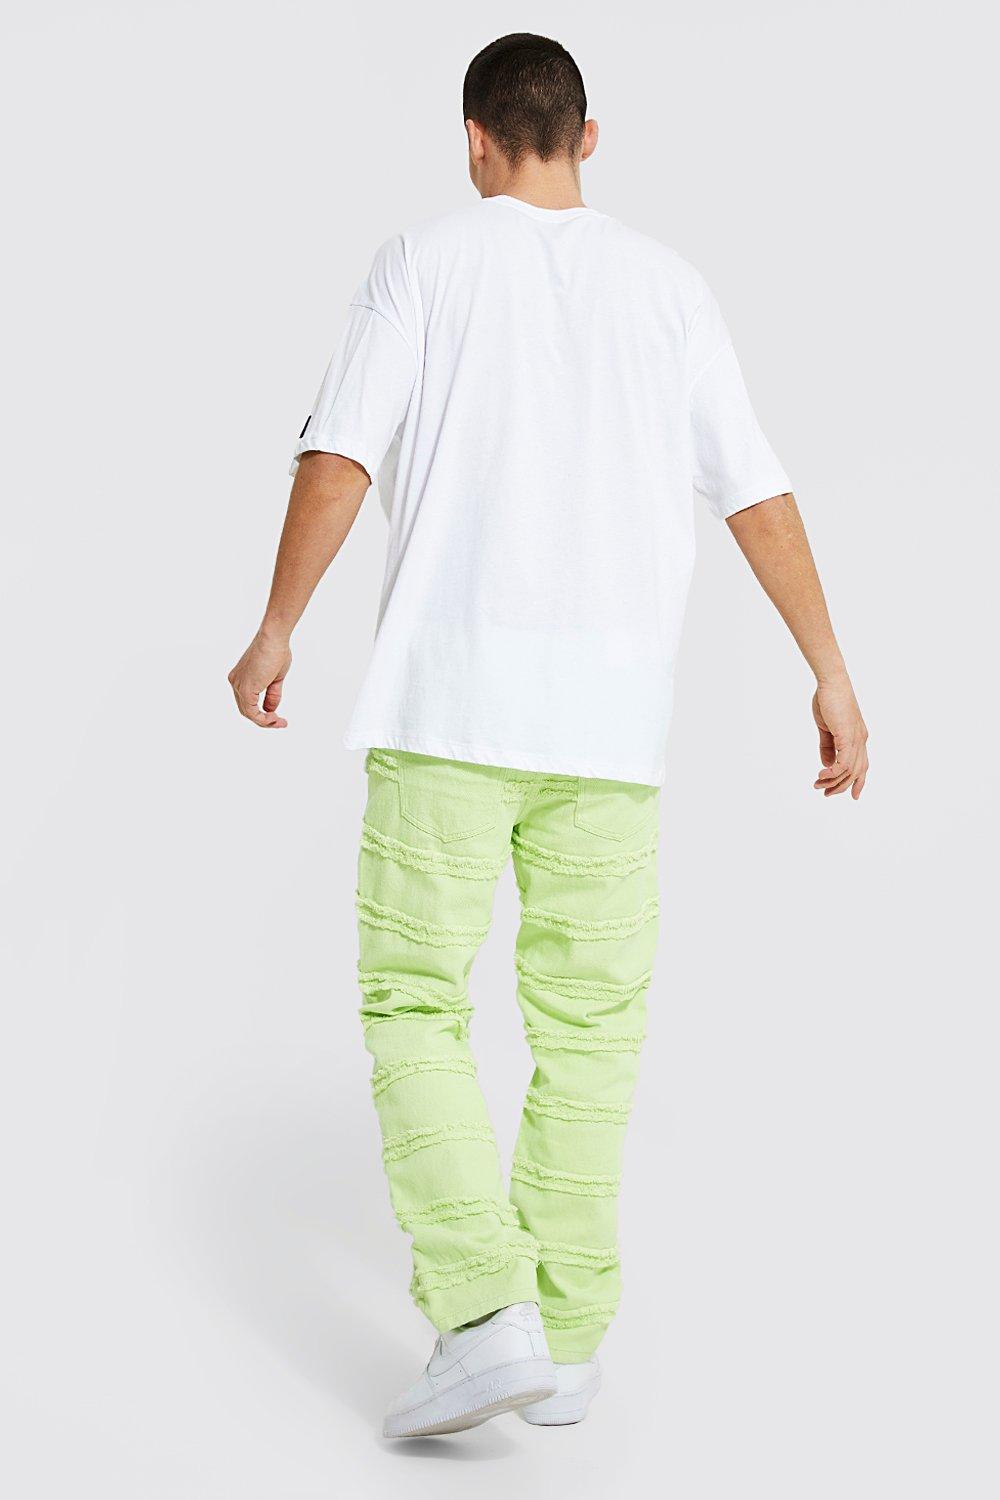 Boohoo Denim Relaxed Fit Seam Distressed Jeans in Lime Green Womens Mens Clothing Mens Jeans Straight-leg jeans 